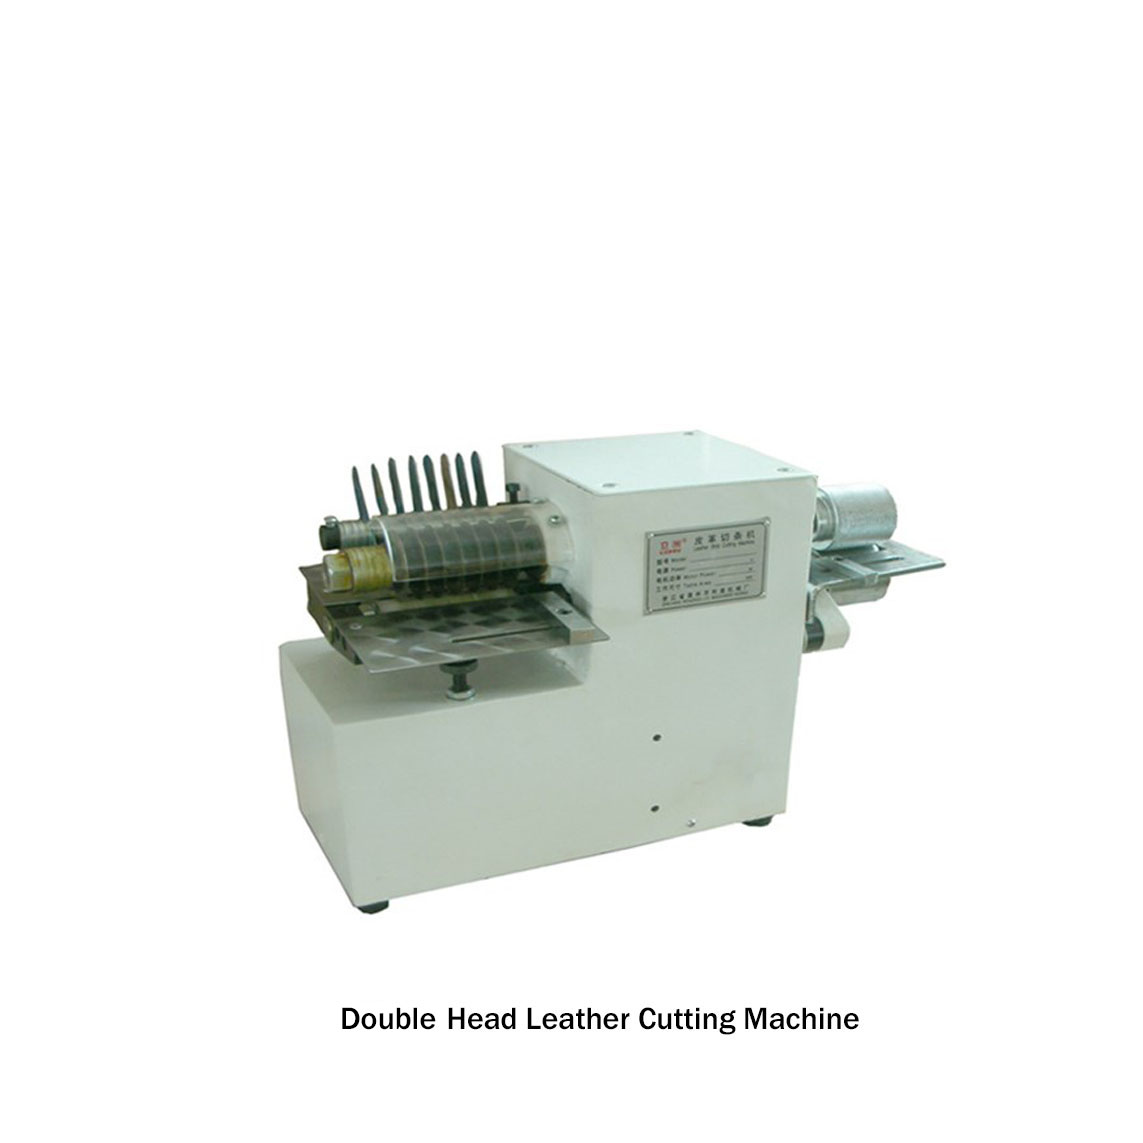 Double Head LEather Cutting Machine